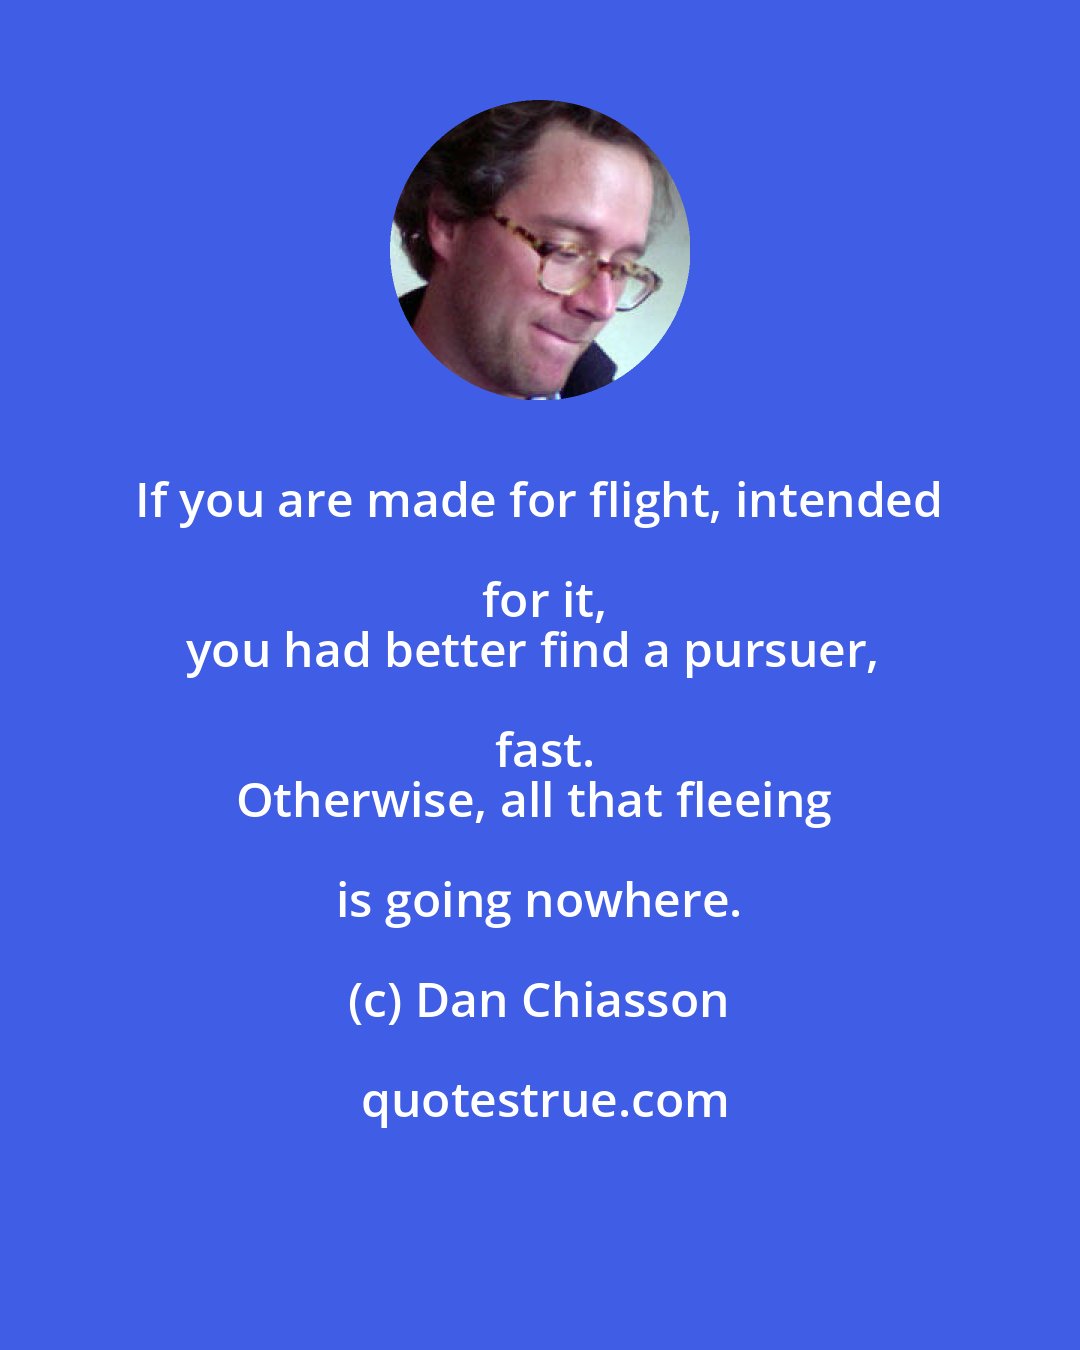 Dan Chiasson: If you are made for flight, intended for it,
you had better find a pursuer, fast.
Otherwise, all that fleeing is going nowhere.